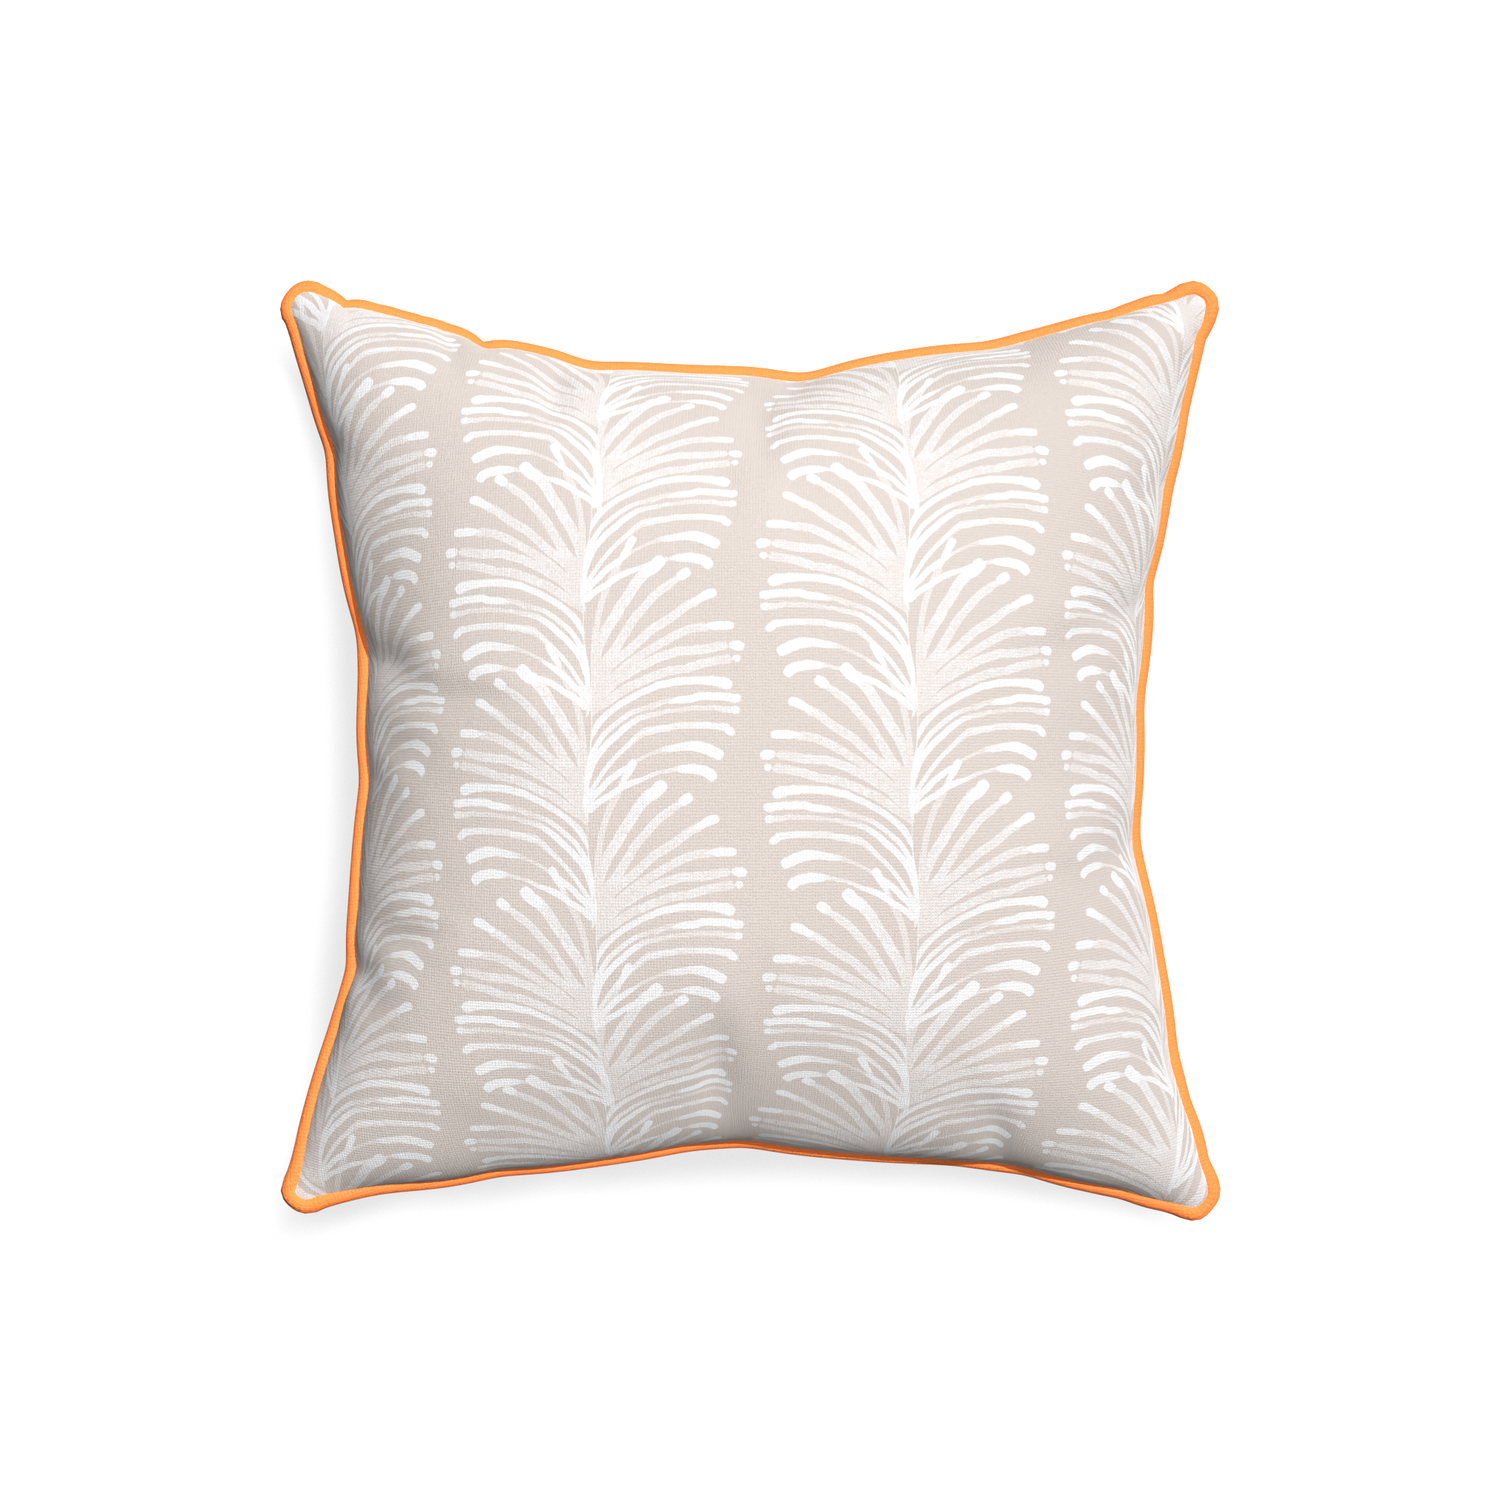 20-square emma sand custom sand colored botanical stripepillow with clementine piping on white background